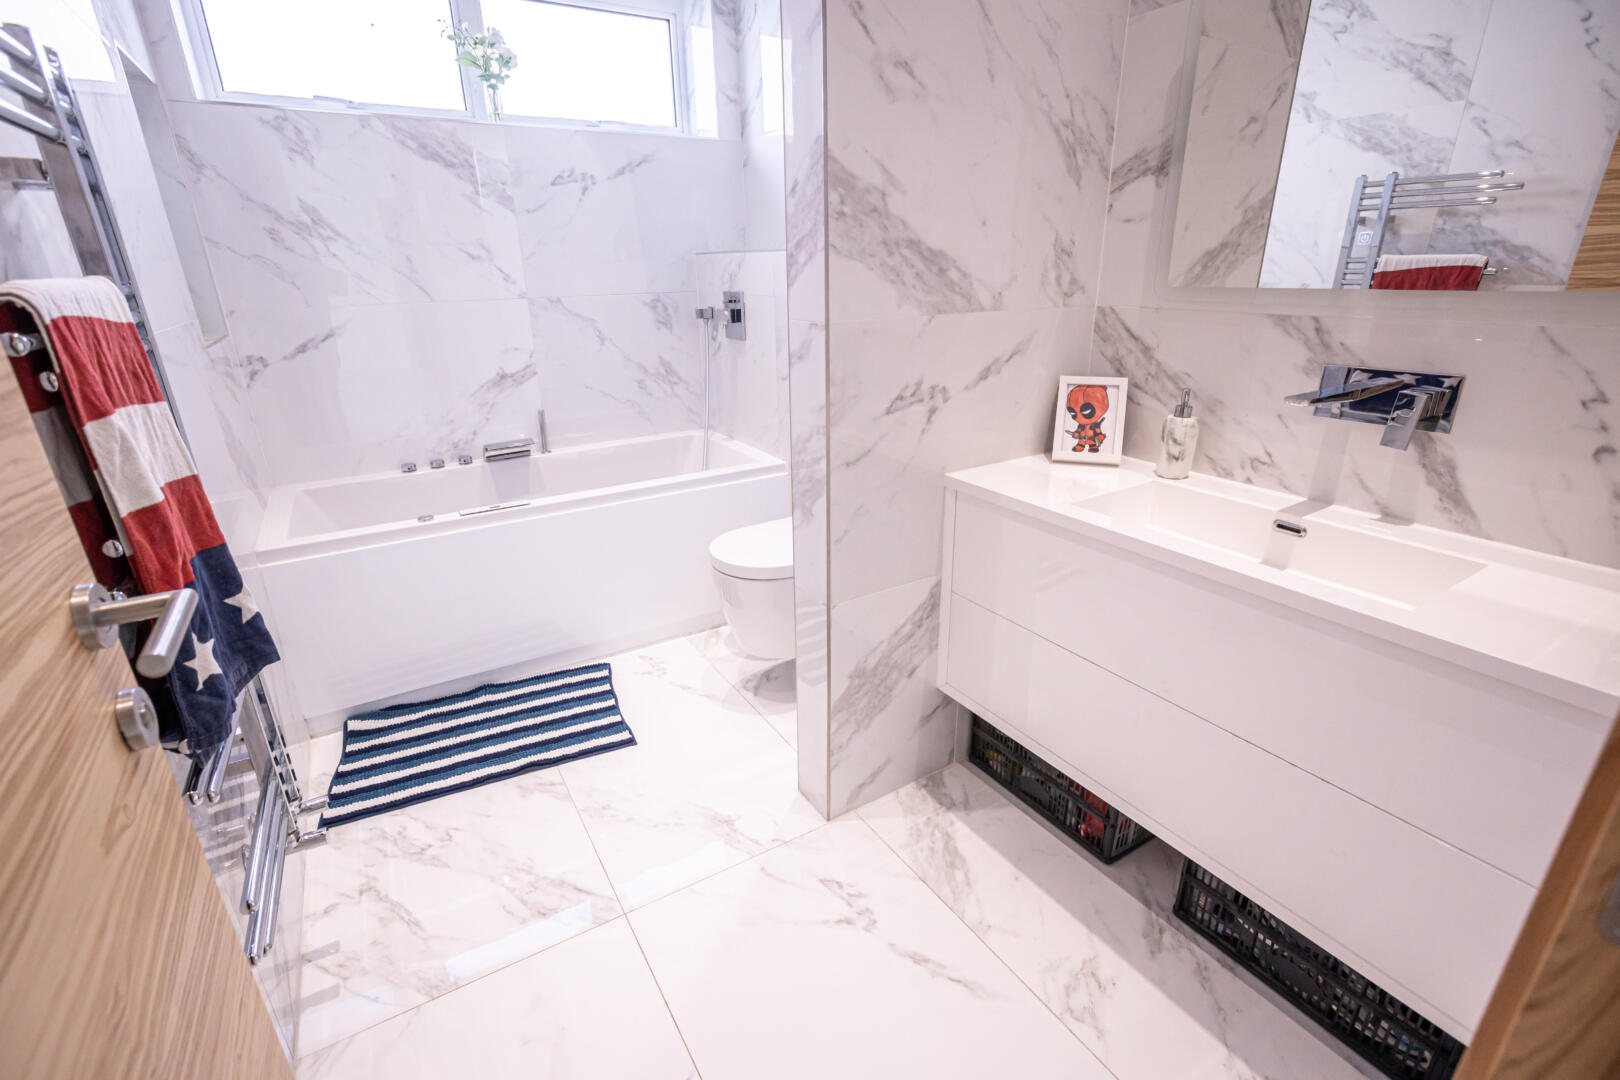 Matching Floor And Wall Tiles in your Bathroom : Roccia